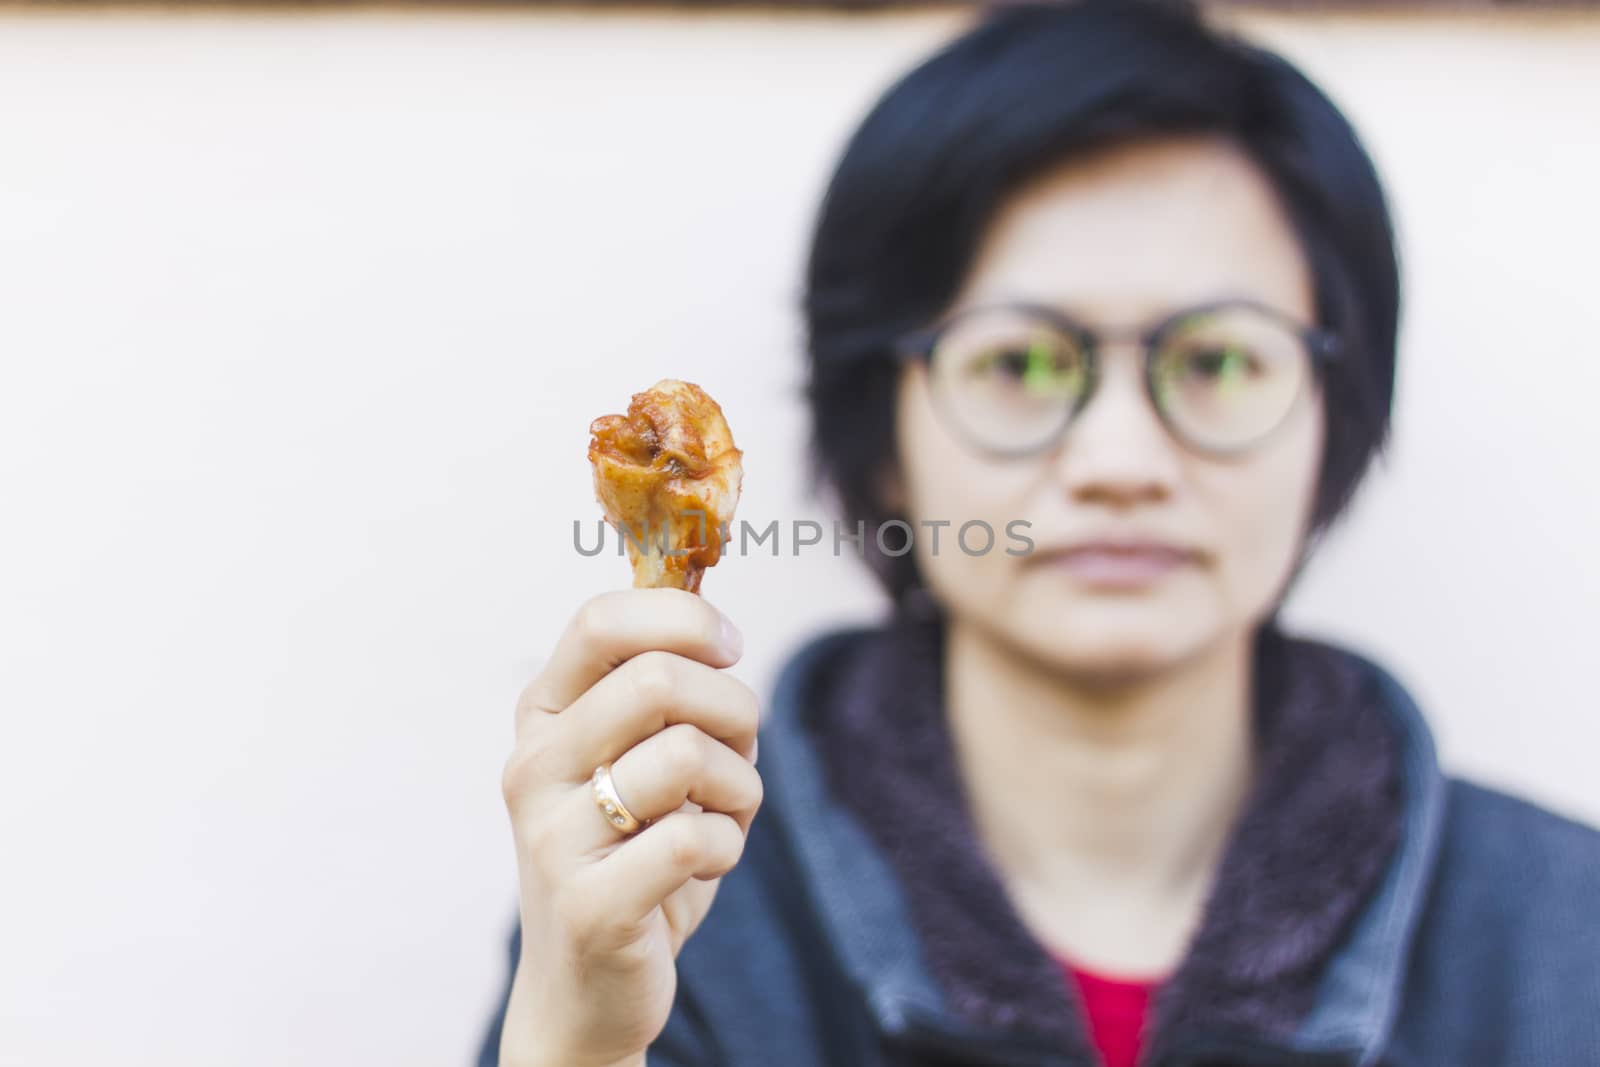 Hand holding grilled chicken wing, stock photo